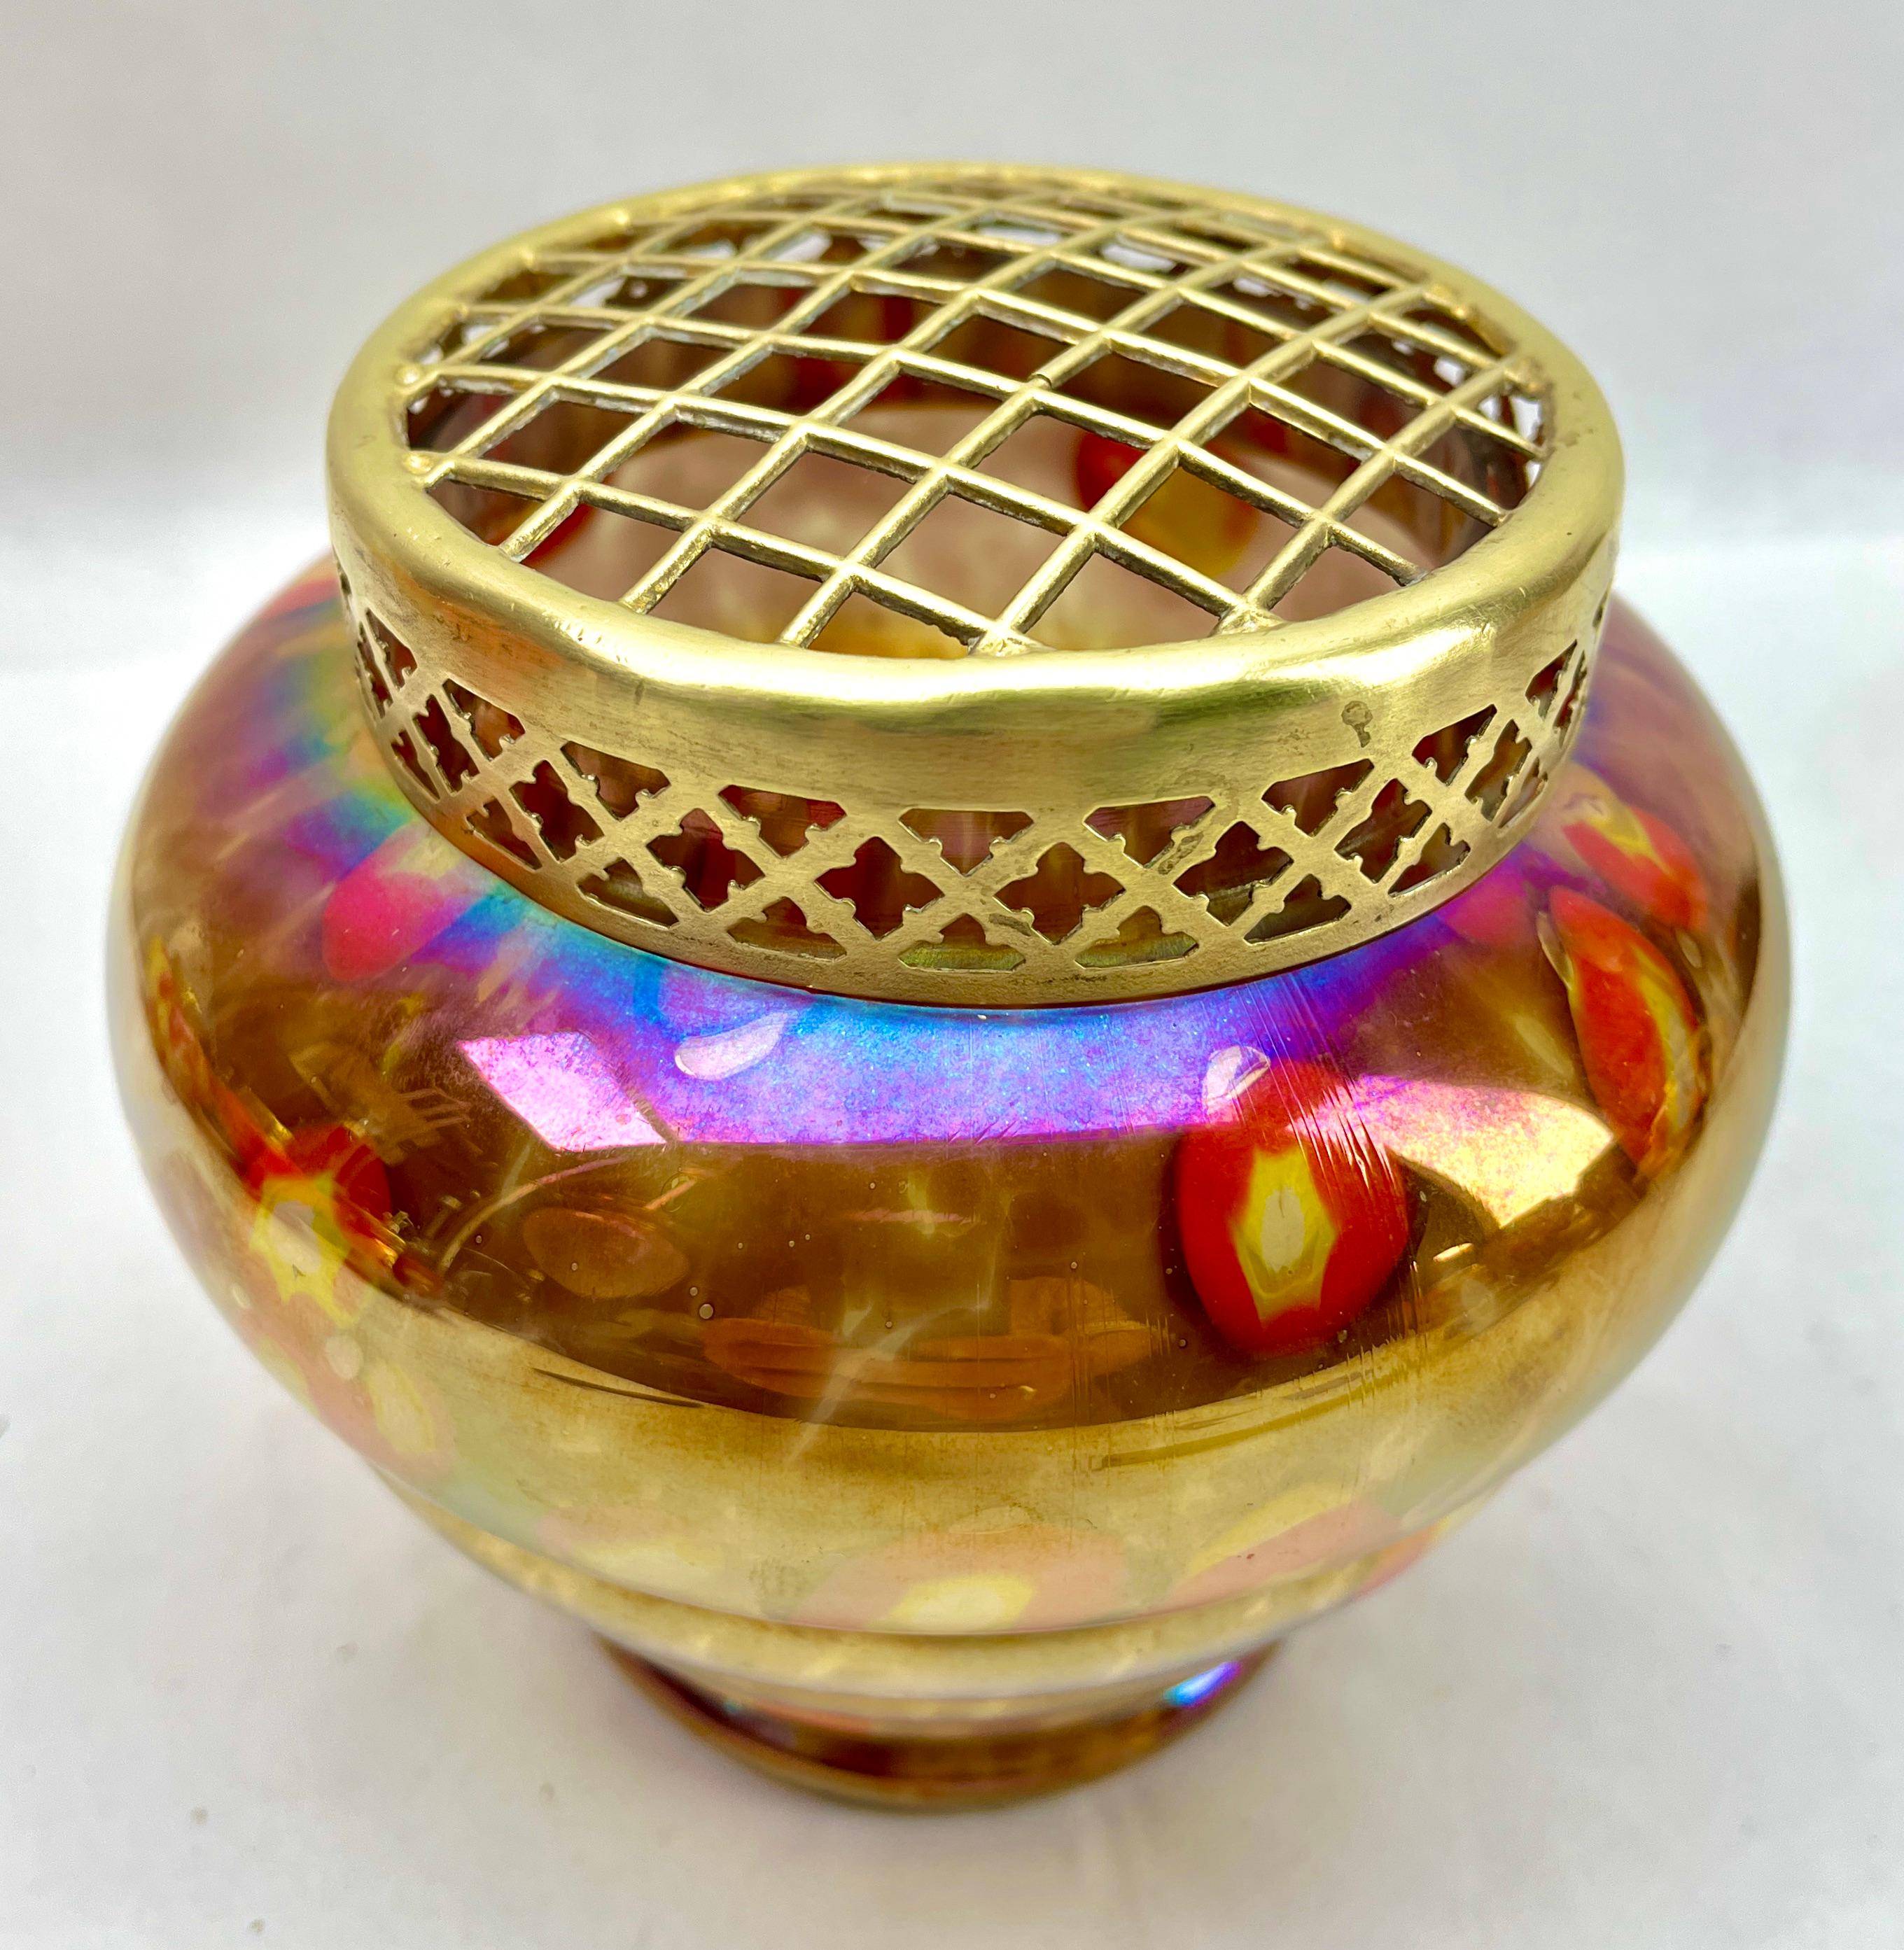 Dramatic multi color decor, in hand blown splatter glass vase . This design for vases is often called 'Pique fleurs' or 'rose-bowl' and is supplied with a fitted metal grille to support stems in an arrangement. 

Special color and technique for any